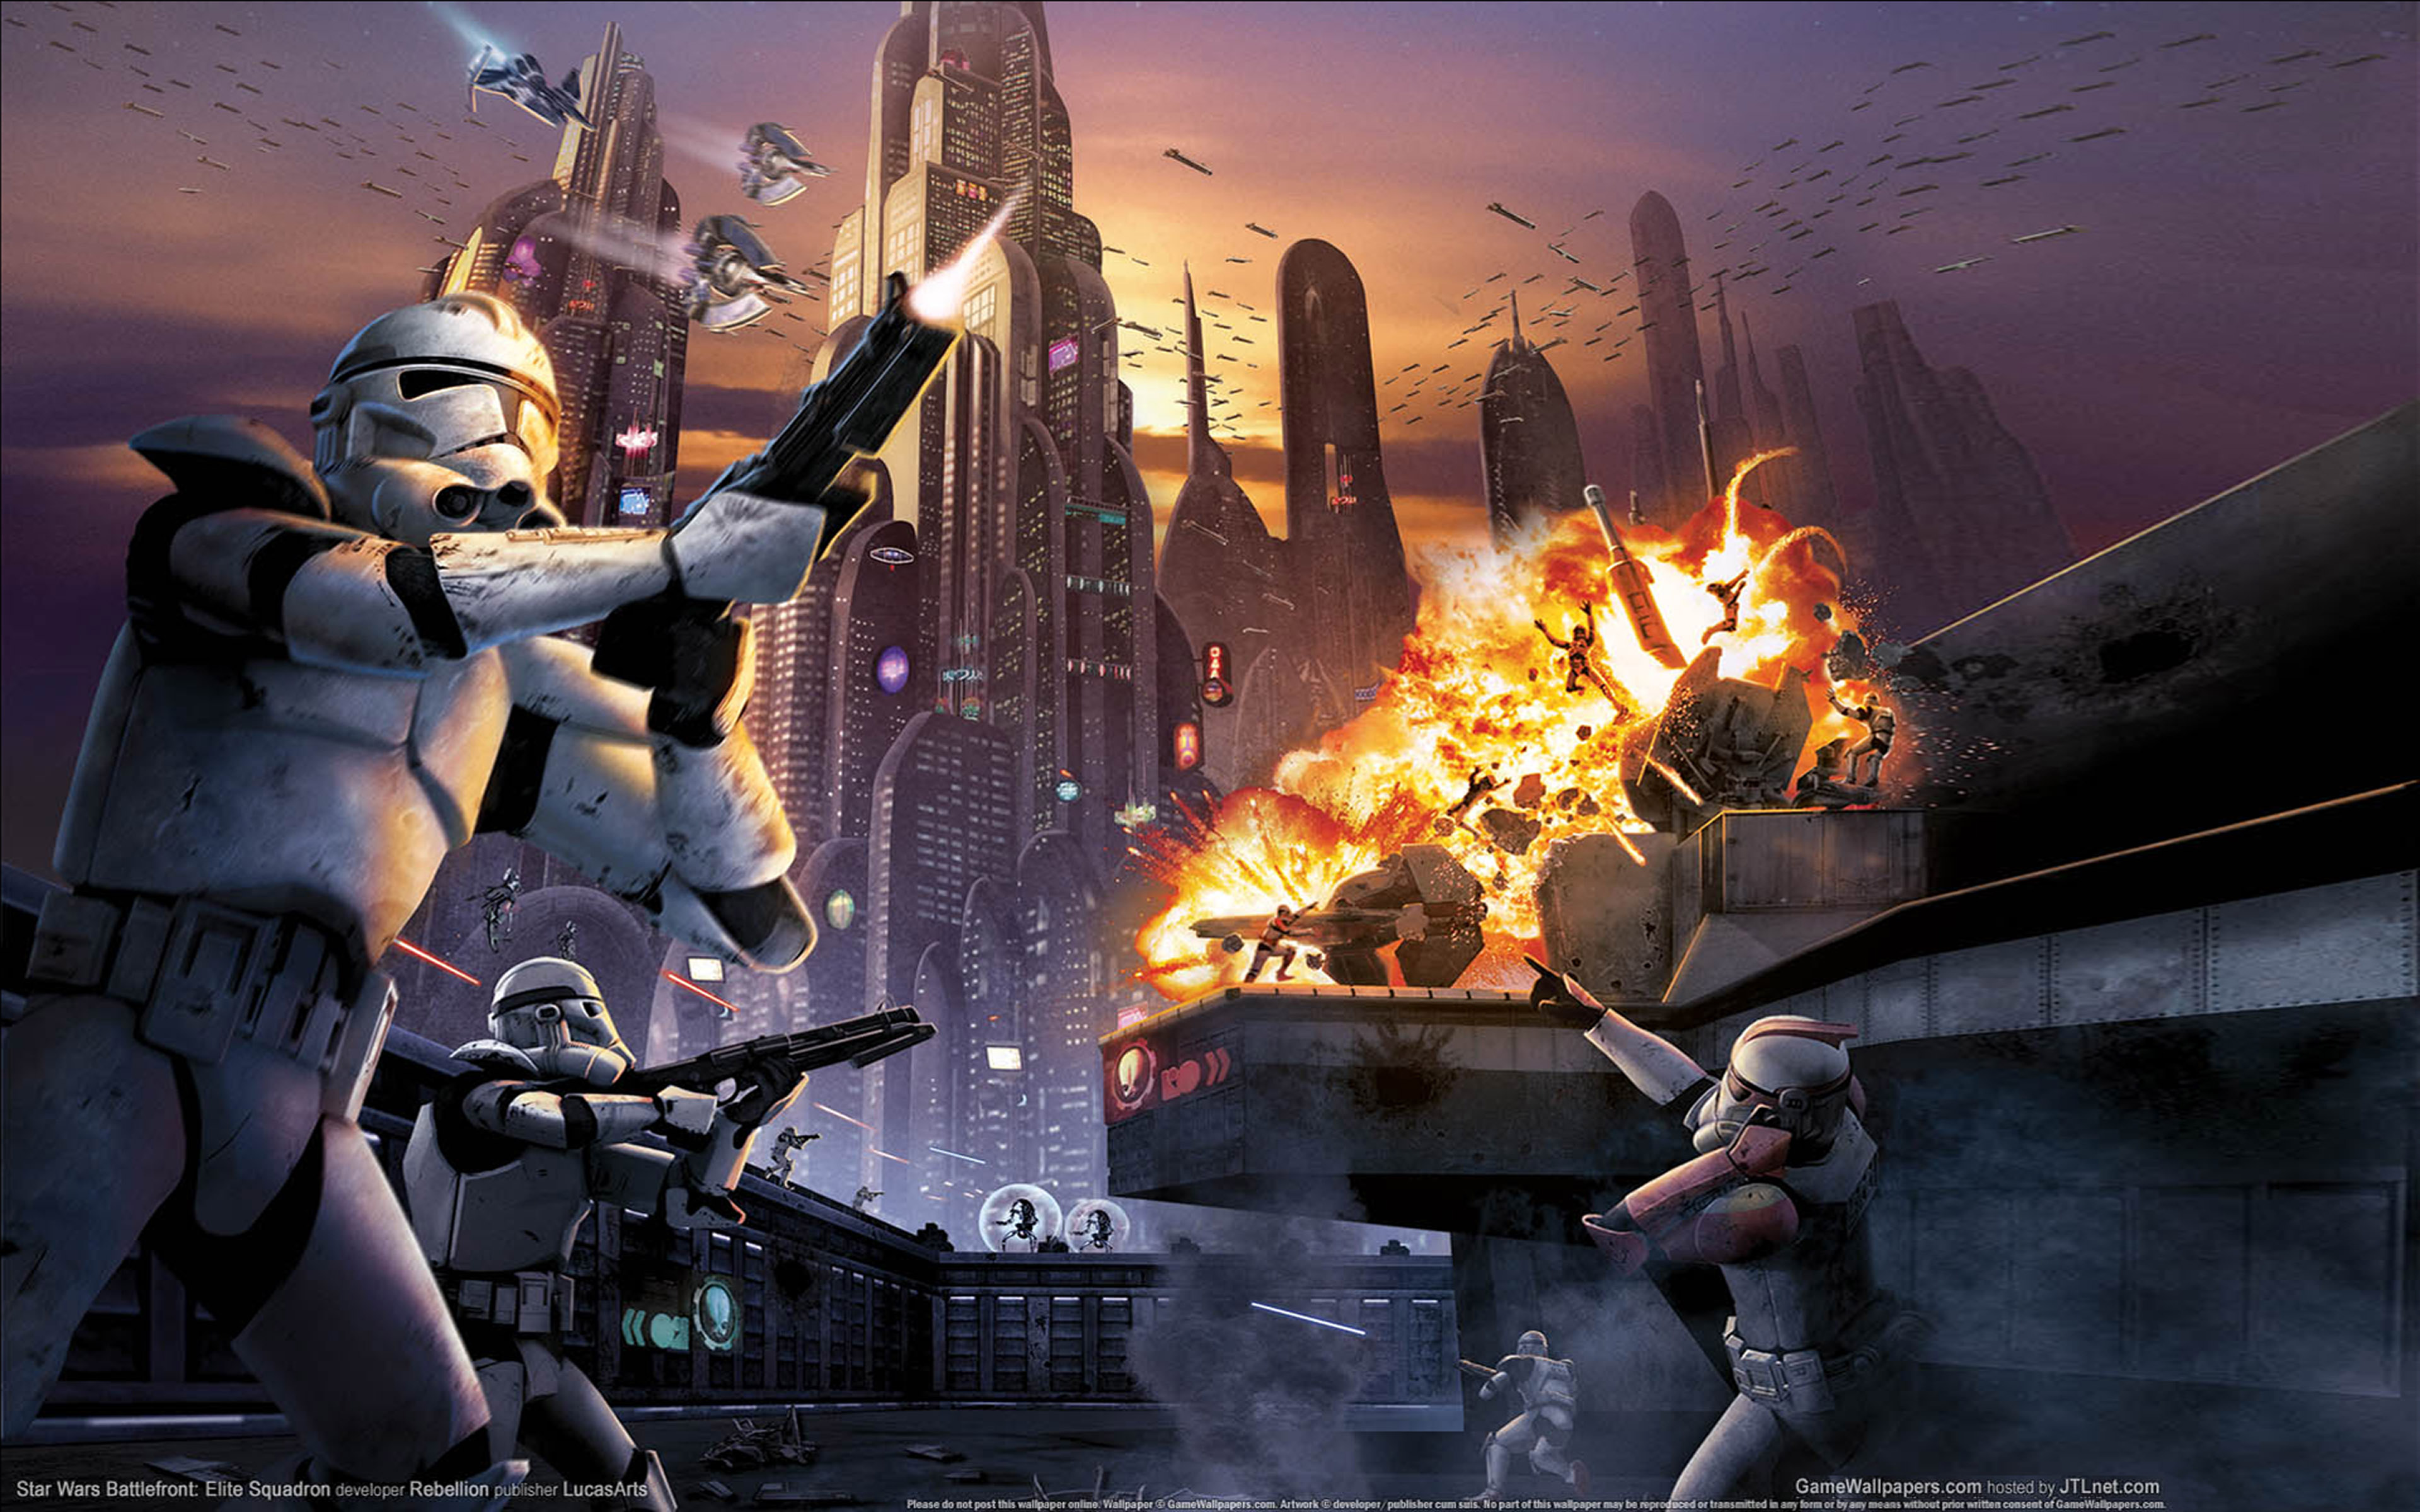 Star Wars The Clone Wars Wallpapers